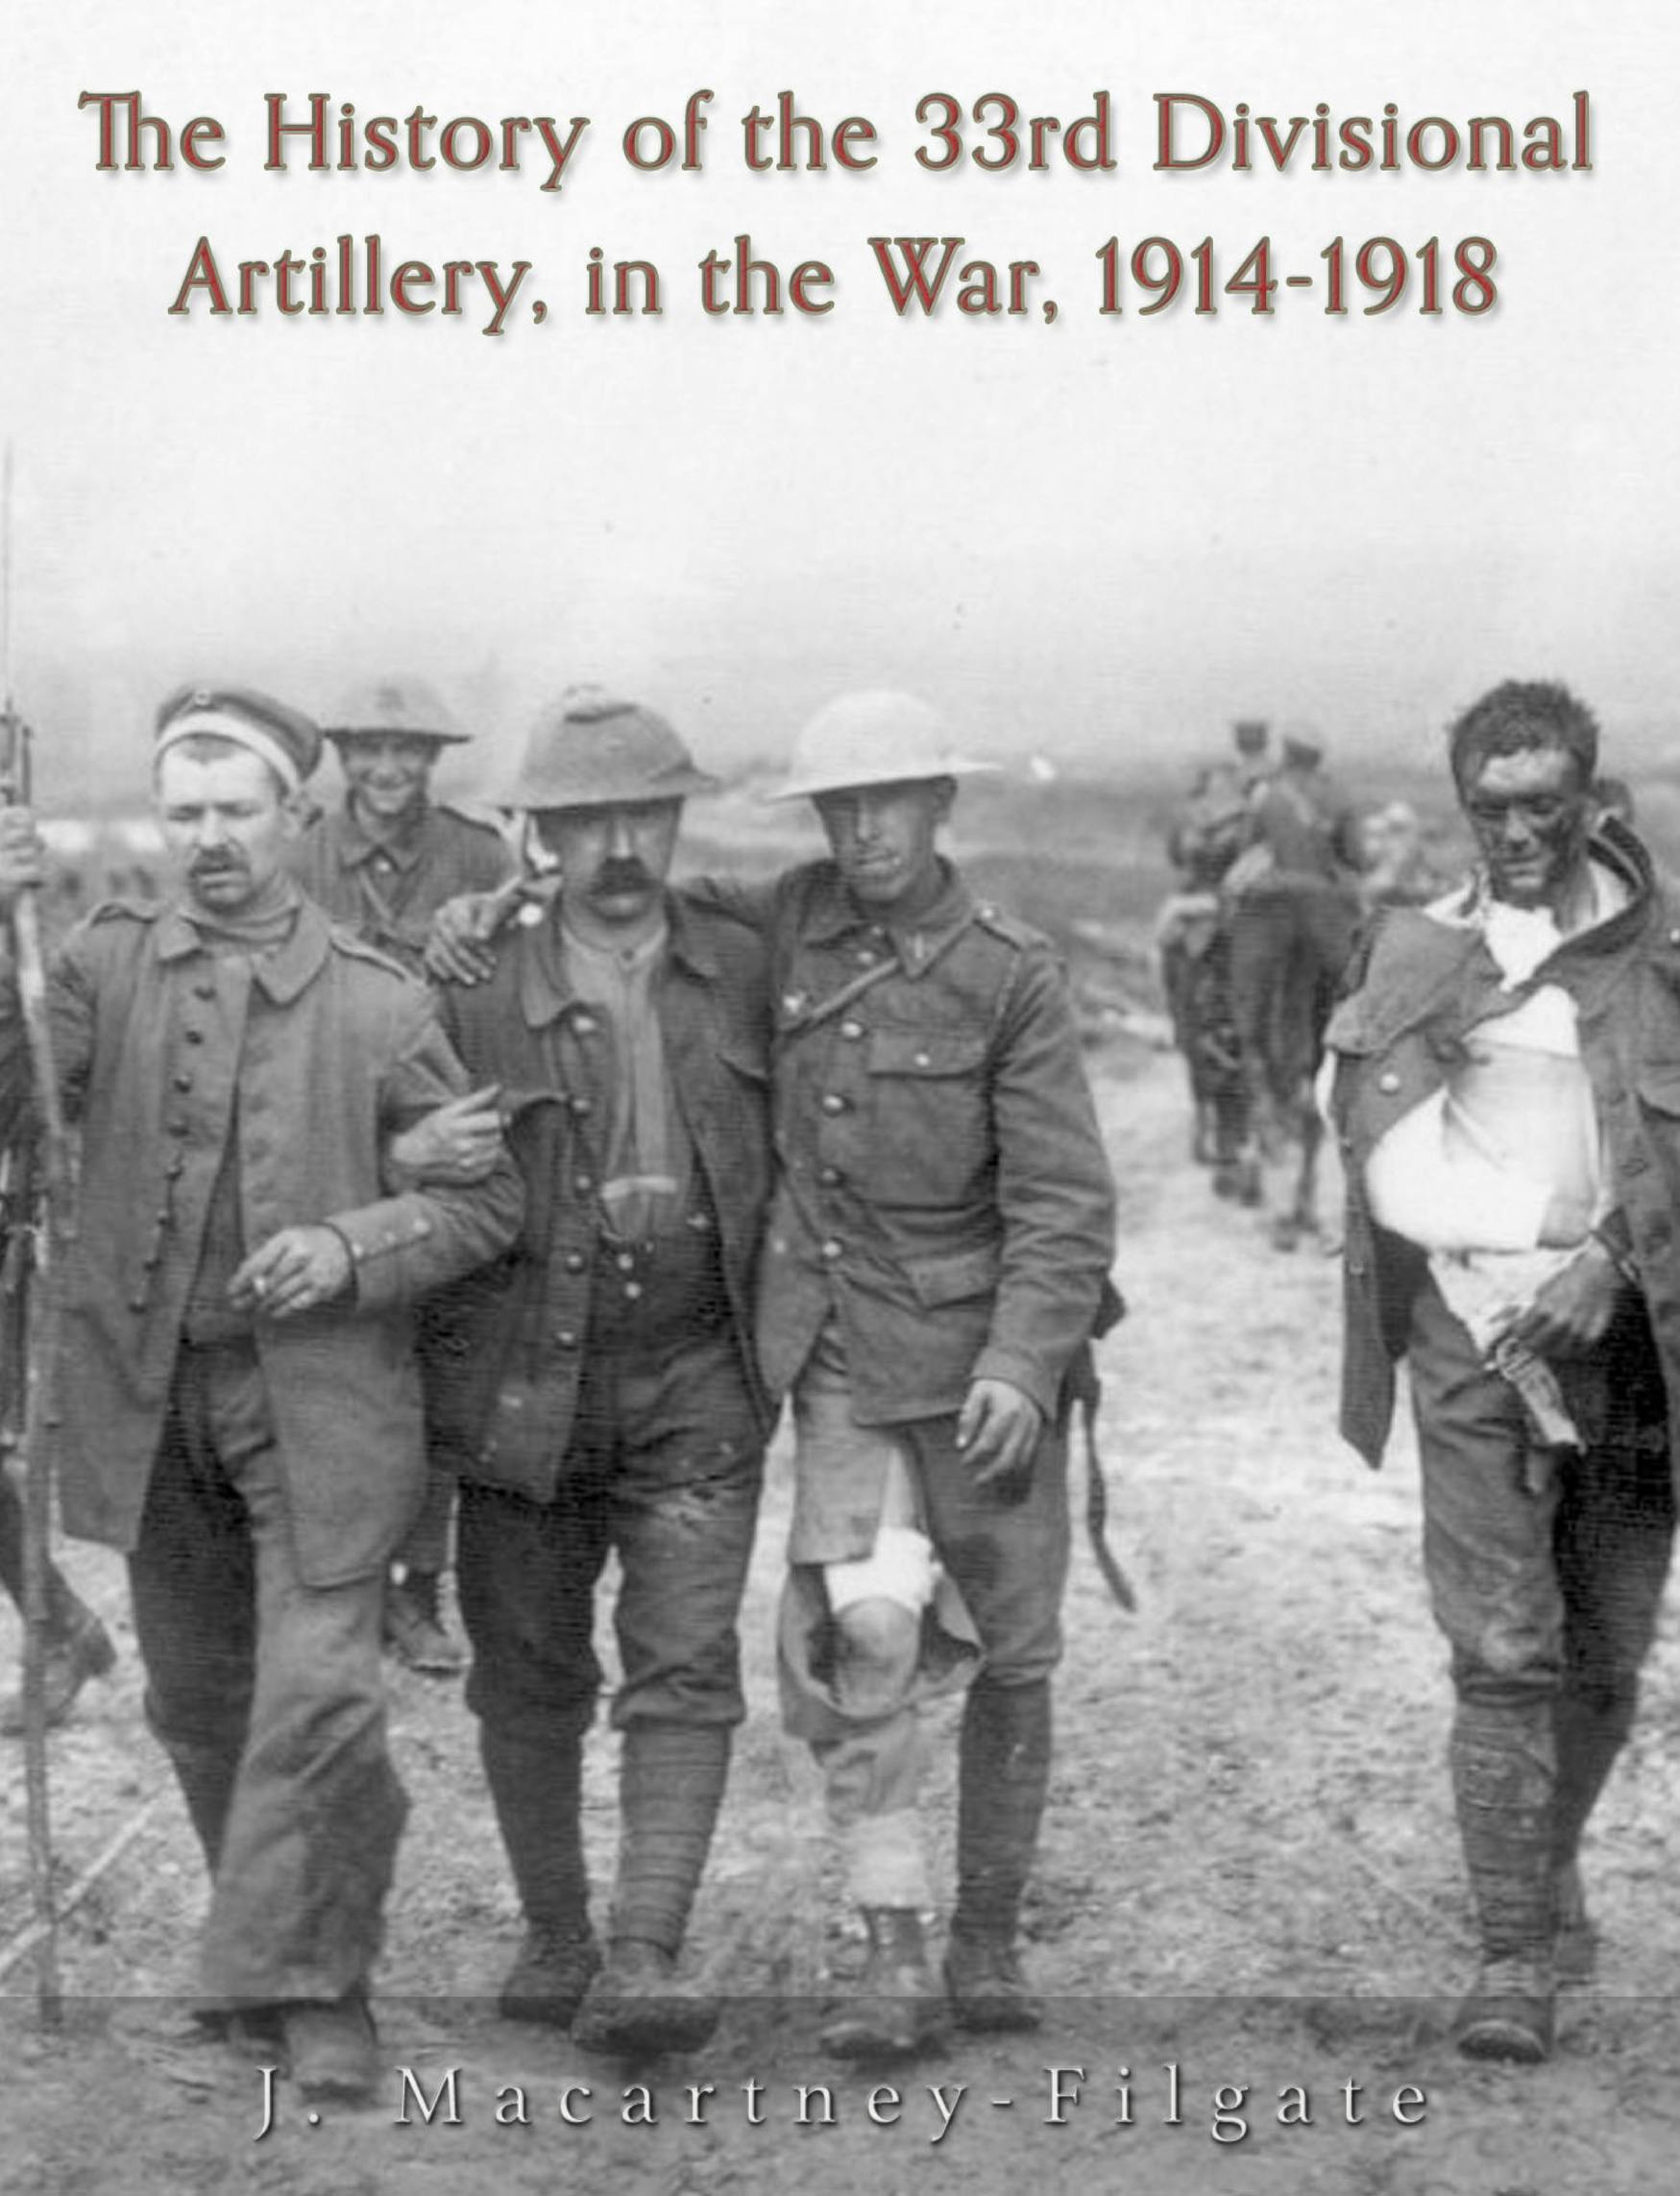 The History of the 33rd Divisional Artillery, in the War, 1914-1918 - J. Macartney-Filgate